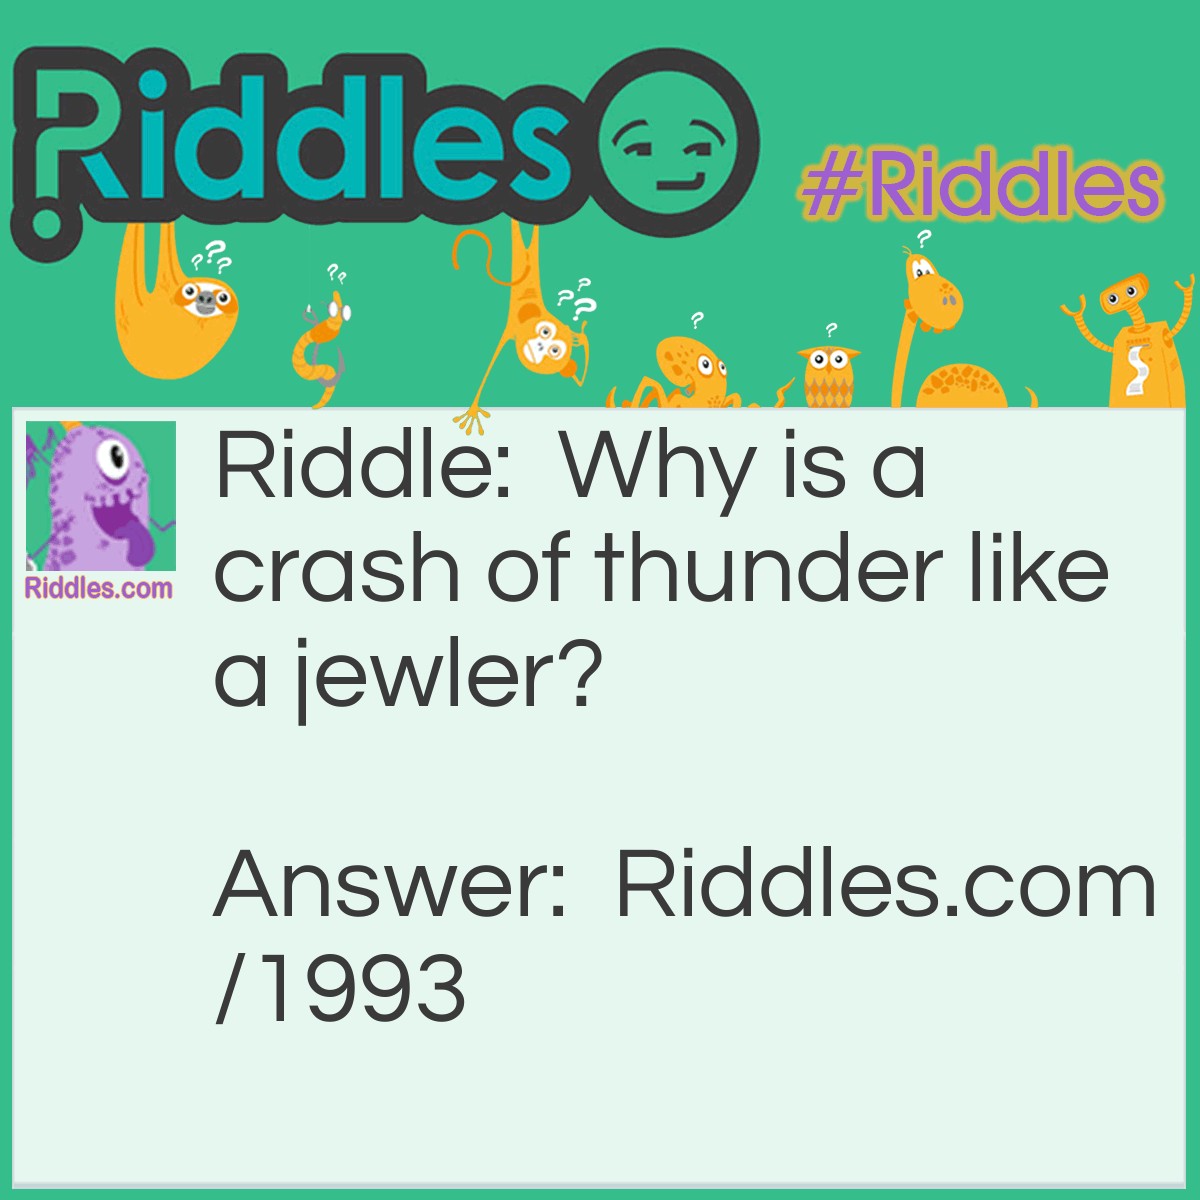 Riddle: Why is a crash of thunder like a jeweler? Answer: Because both make the ear-ring.